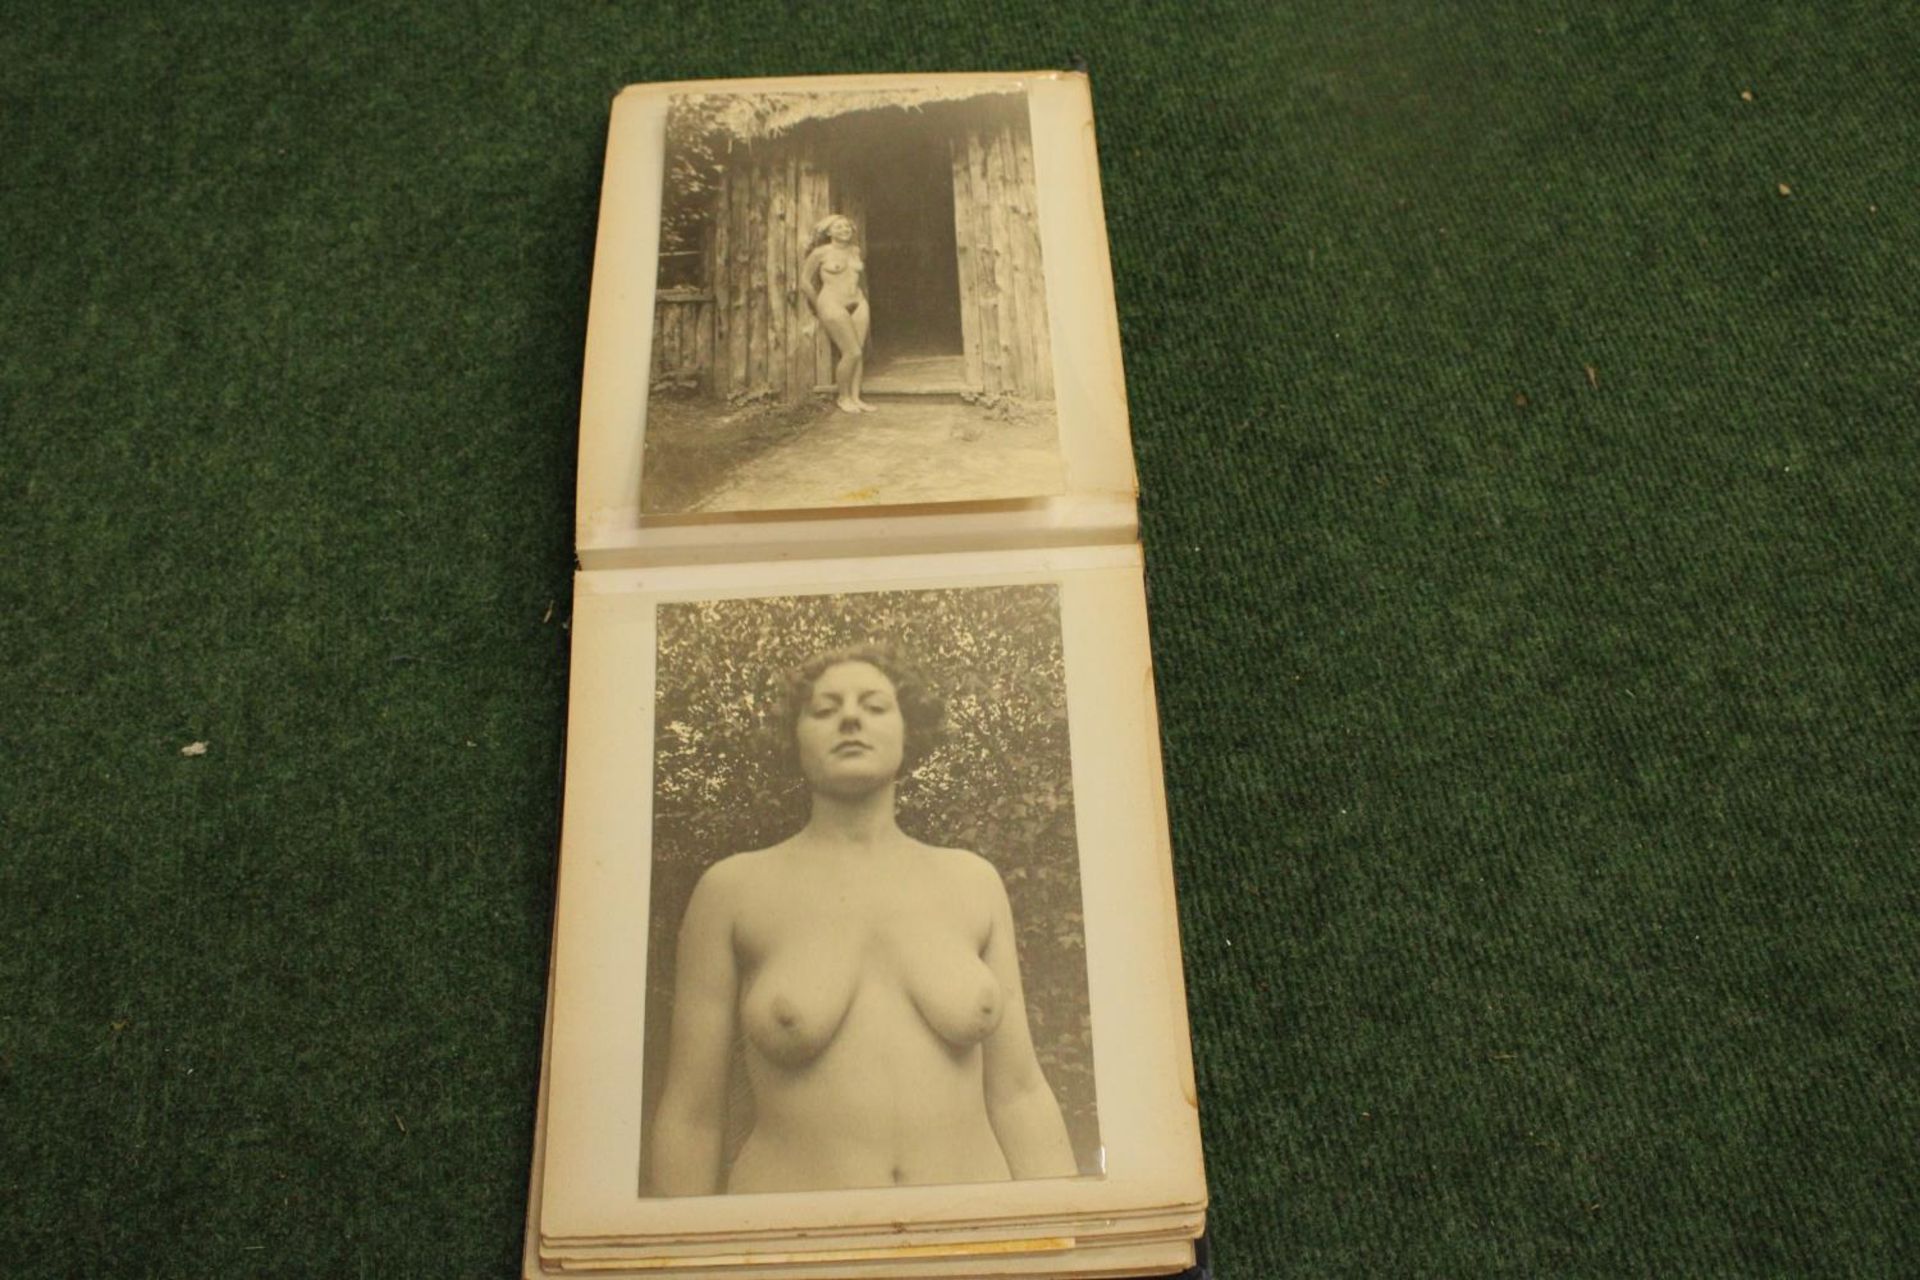 A RARE ALBUM CONTAINING BLACK AND WHITE PHOTOGRAPHS TAKEN IN THE 1920'S/30'S OF WOMEN POSING NUDE. - Image 8 of 9